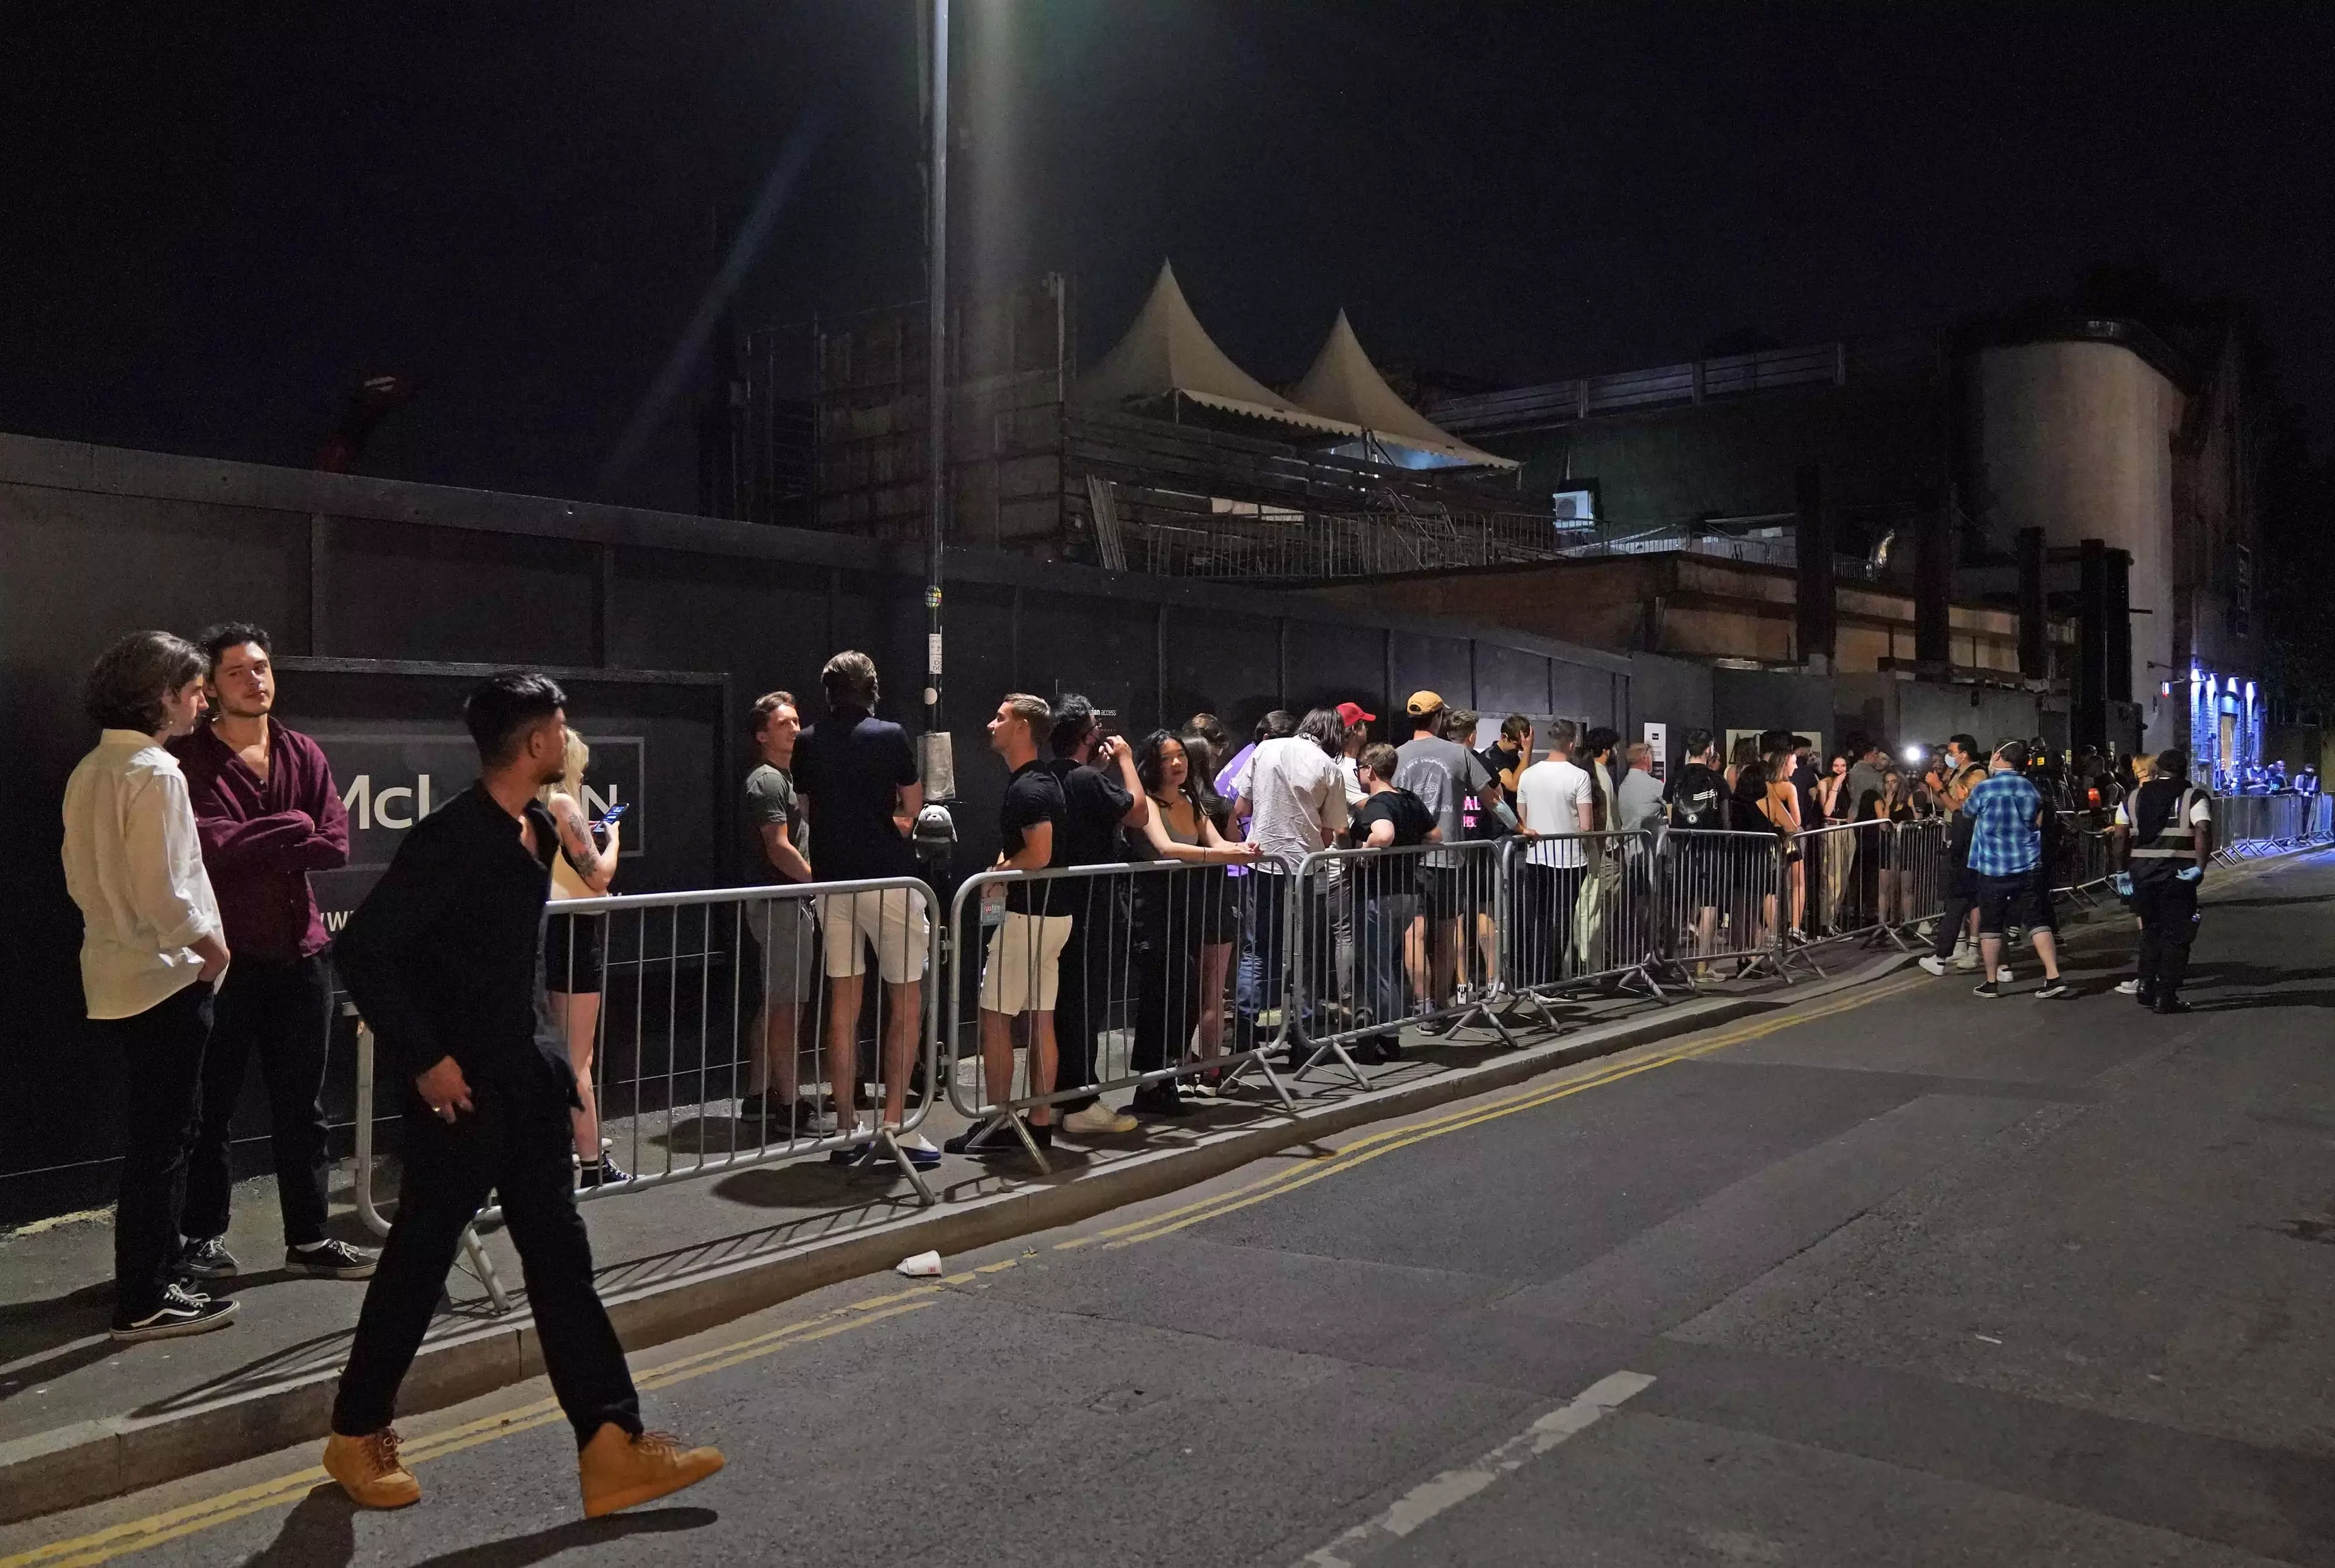 People queuing outside Egg nightclub in London.